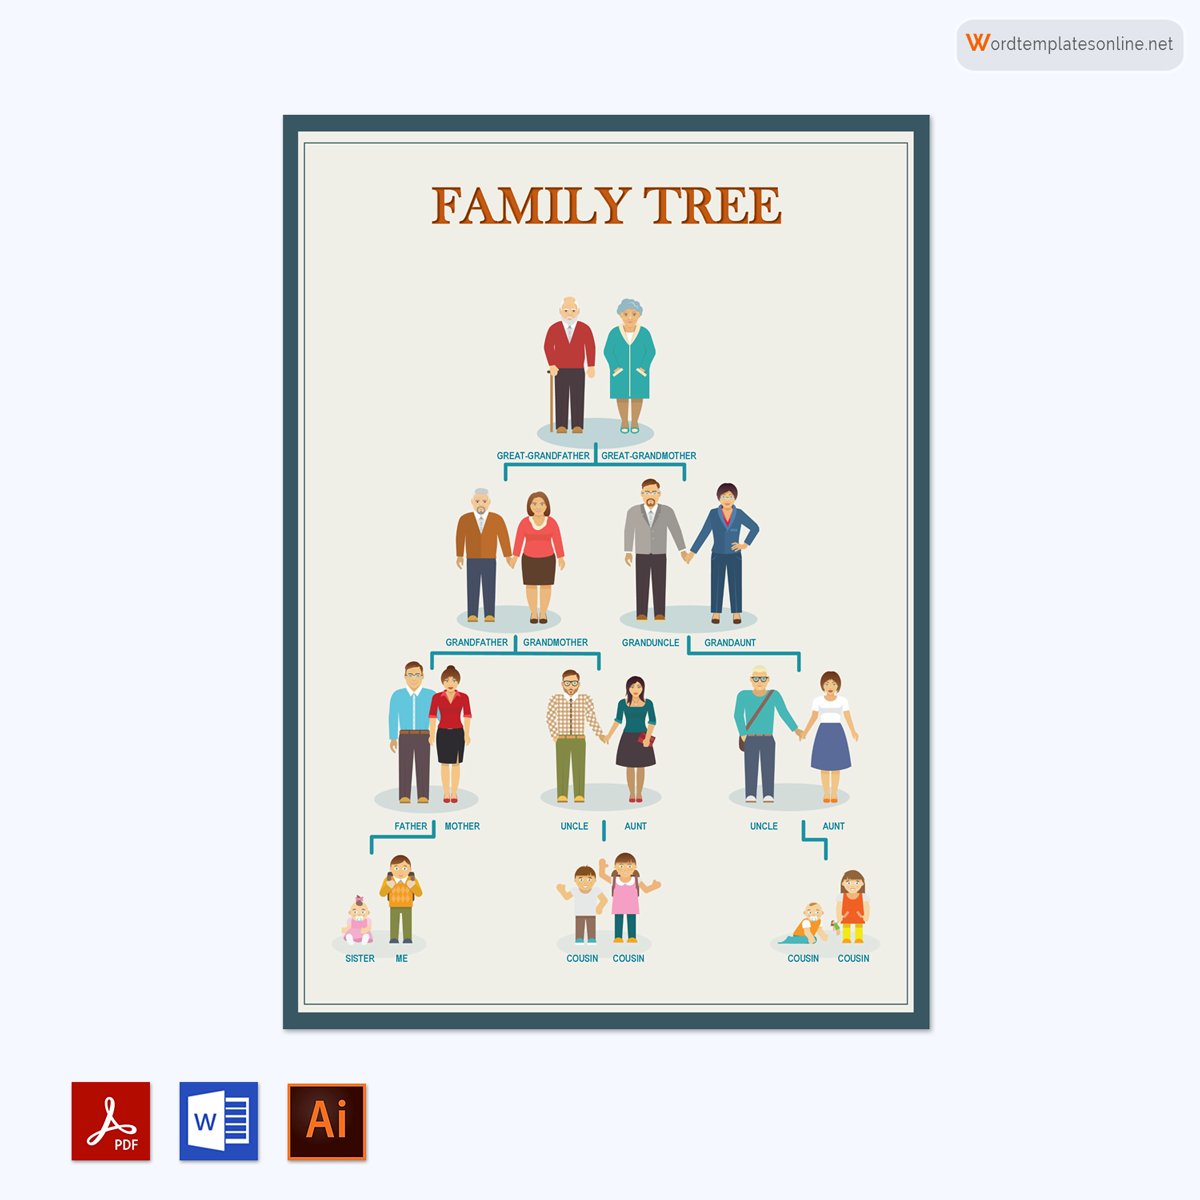  family tree template online